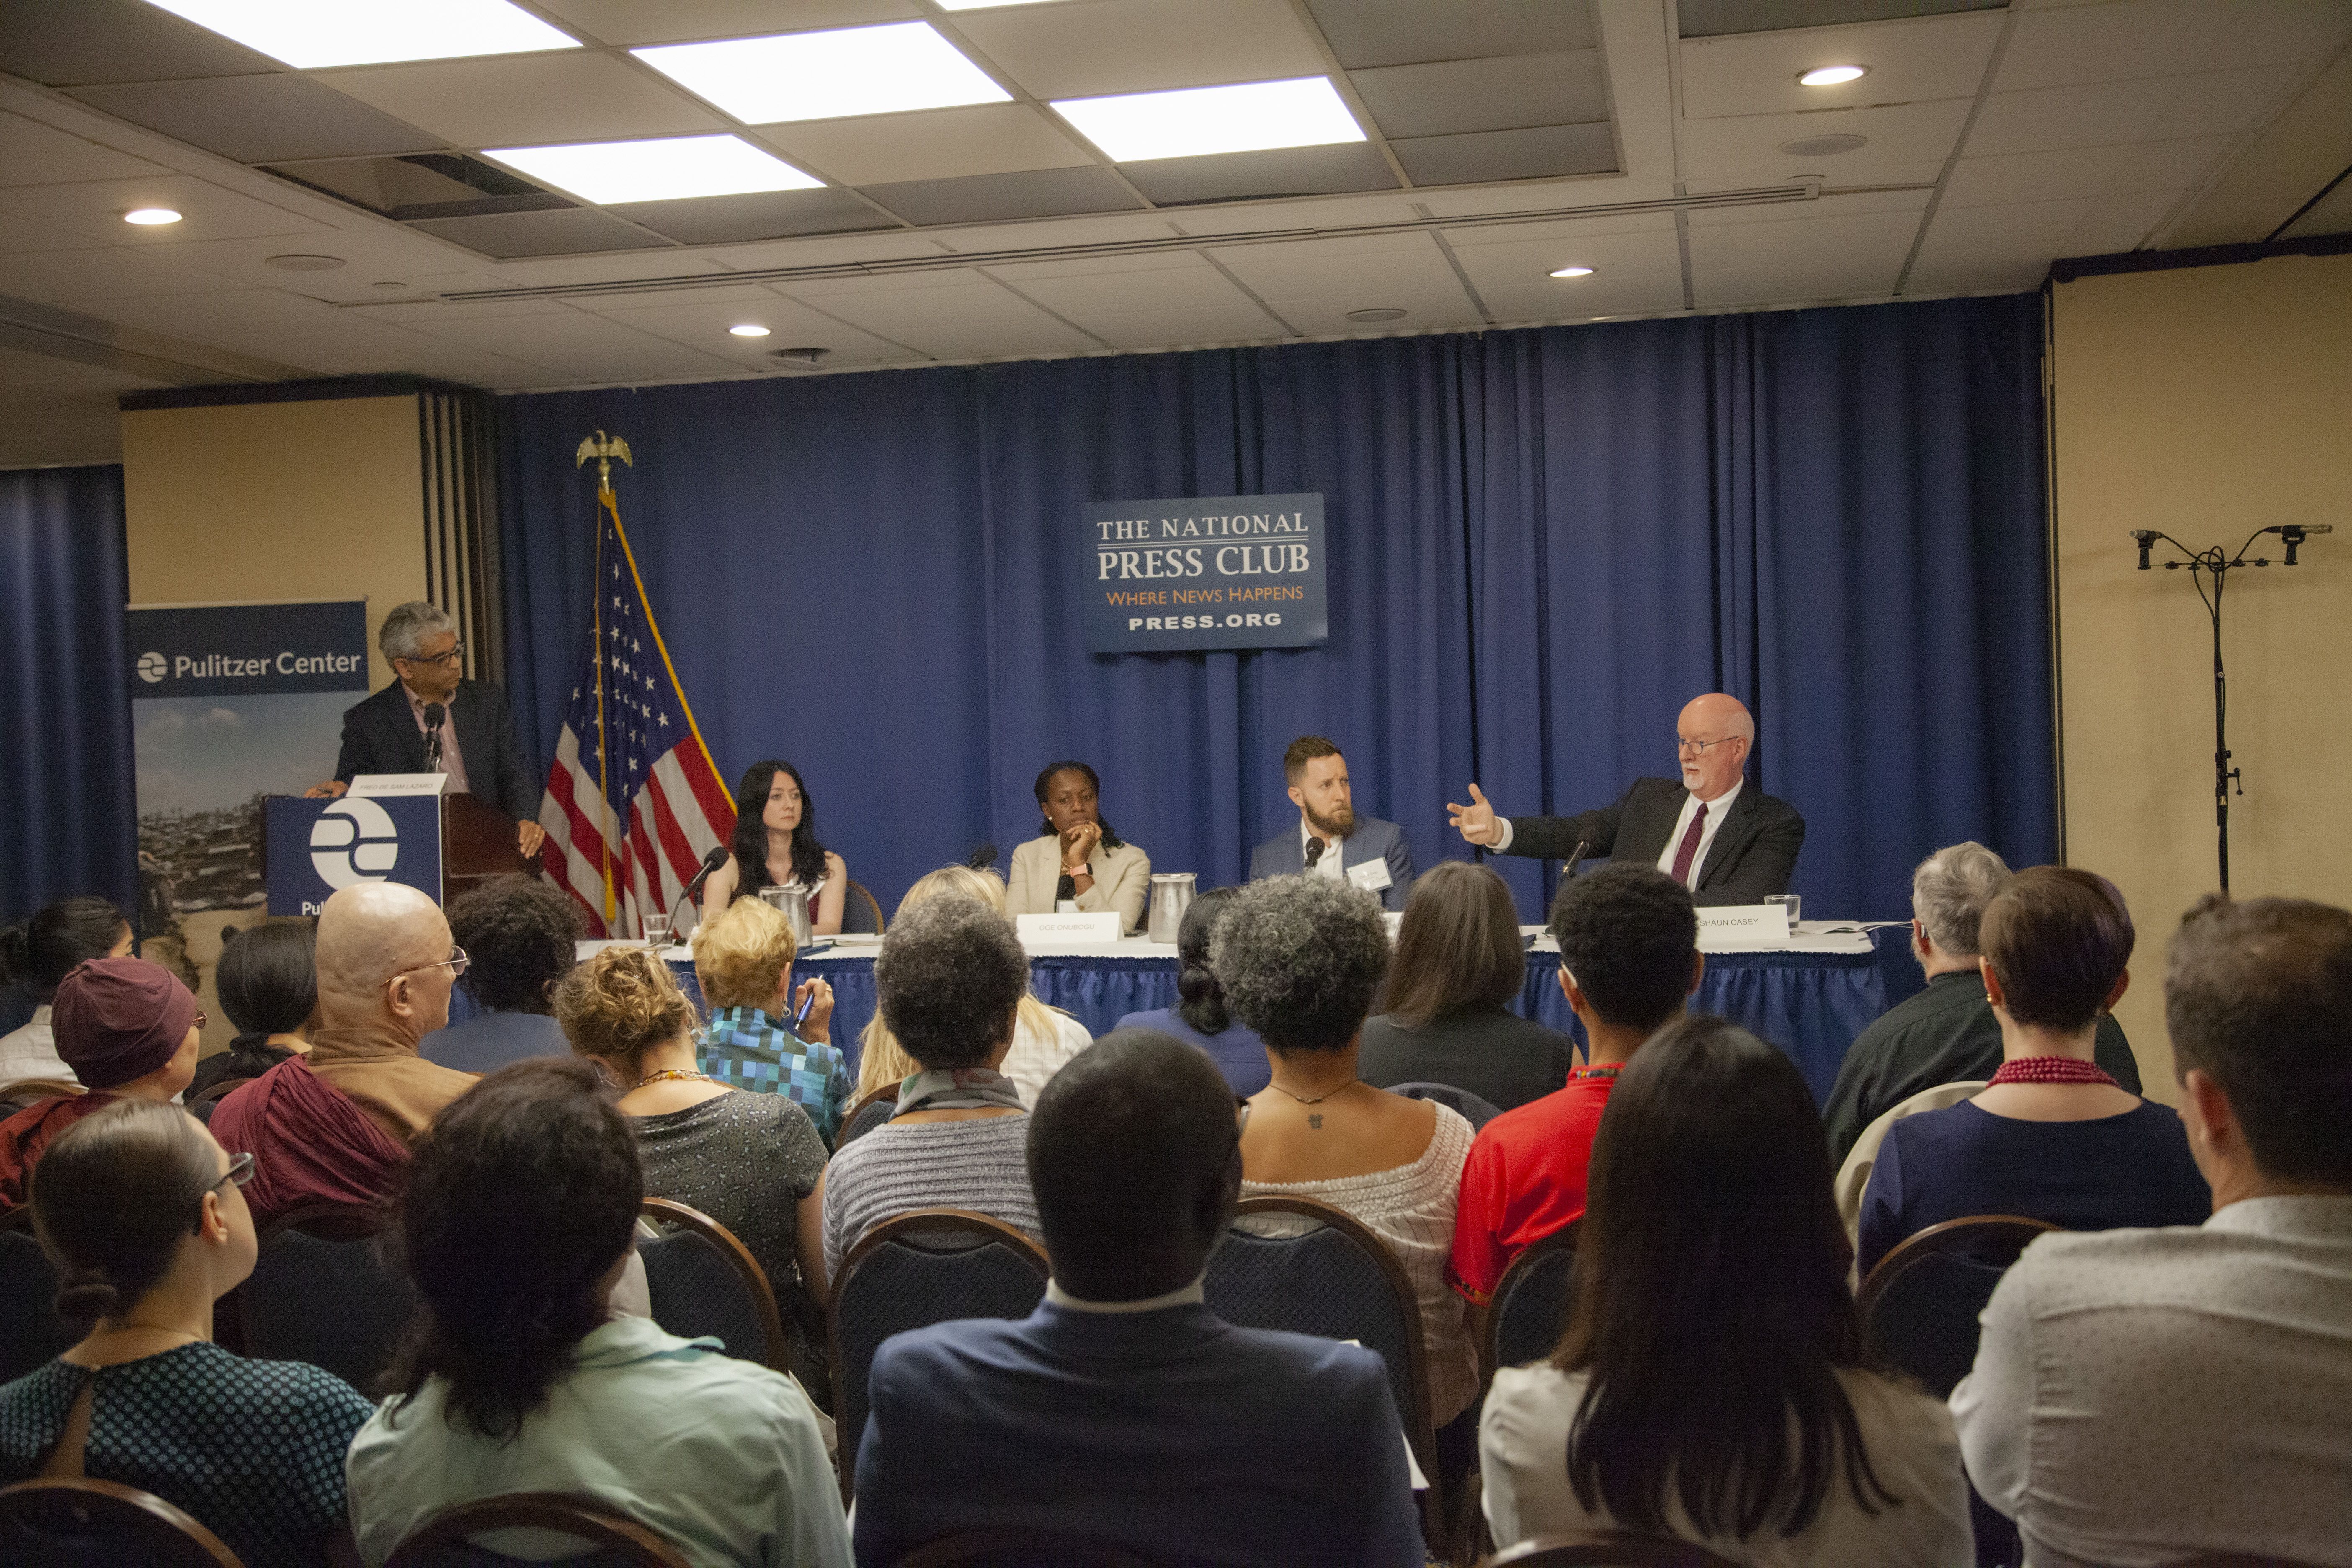 Fred de Sam Lazaro (far left) discusses religion and peacebuilding with Cathy Otten (second from left), Oge Onubogu (center), Danny Gold (second from right), and Shaun Casey (far right). Image by Jin Ding. Washington, D.C., 2019.